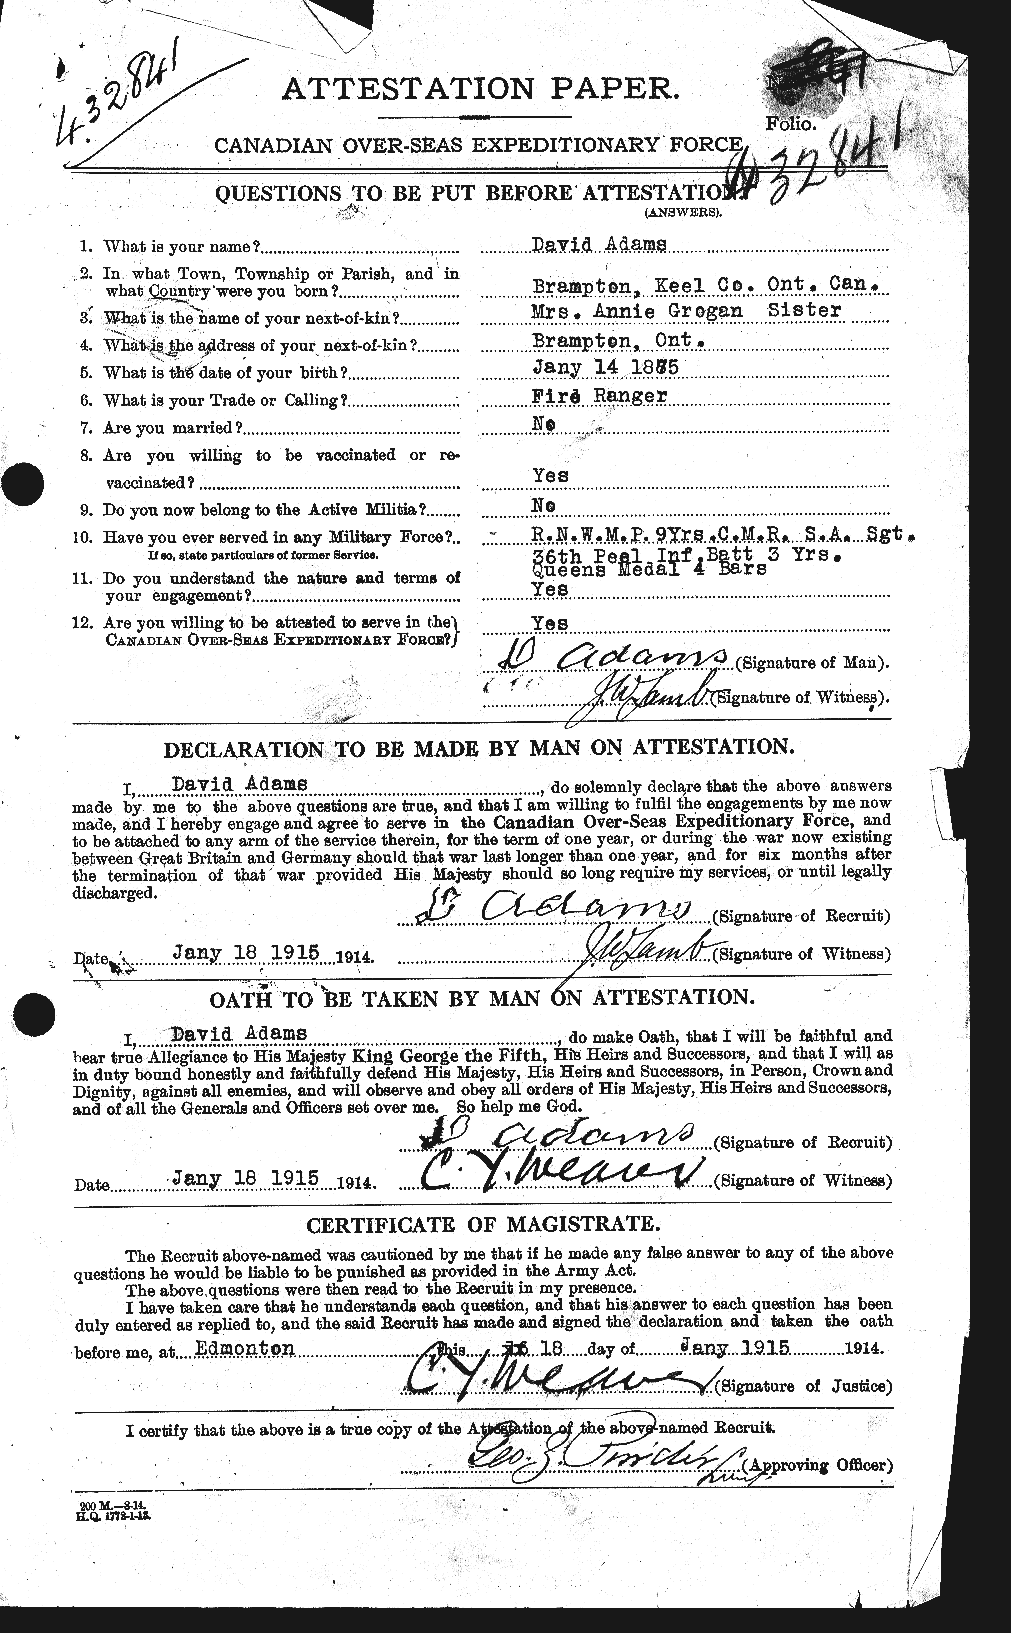 Personnel Records of the First World War - CEF 202653a